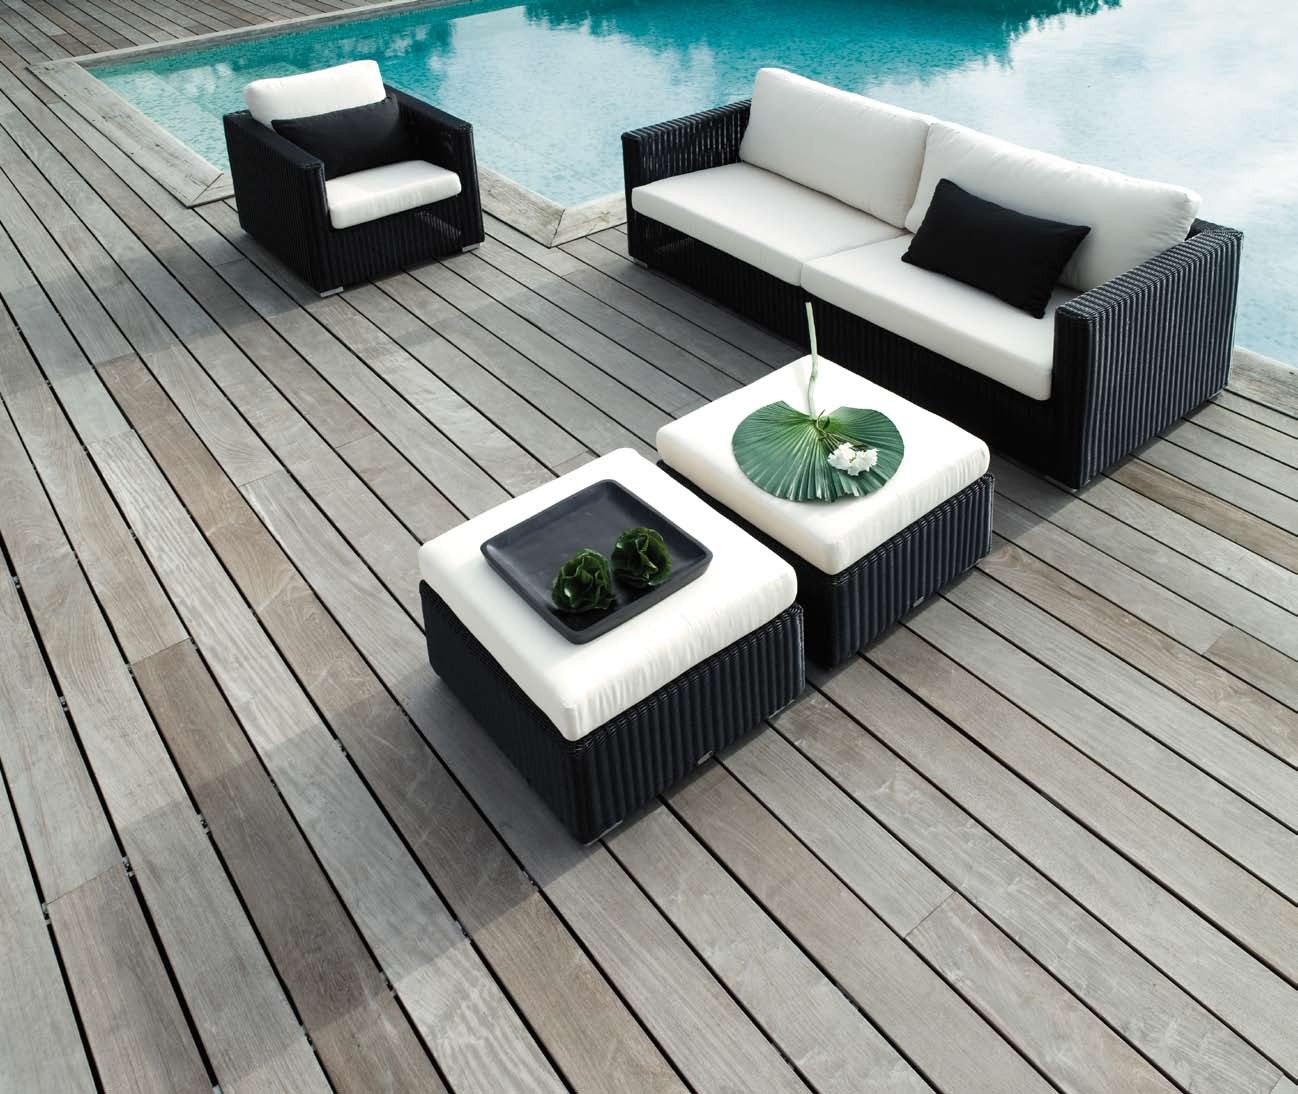 Gebe India - Manufacturers of all weather outdoor furniture india | patio furniture